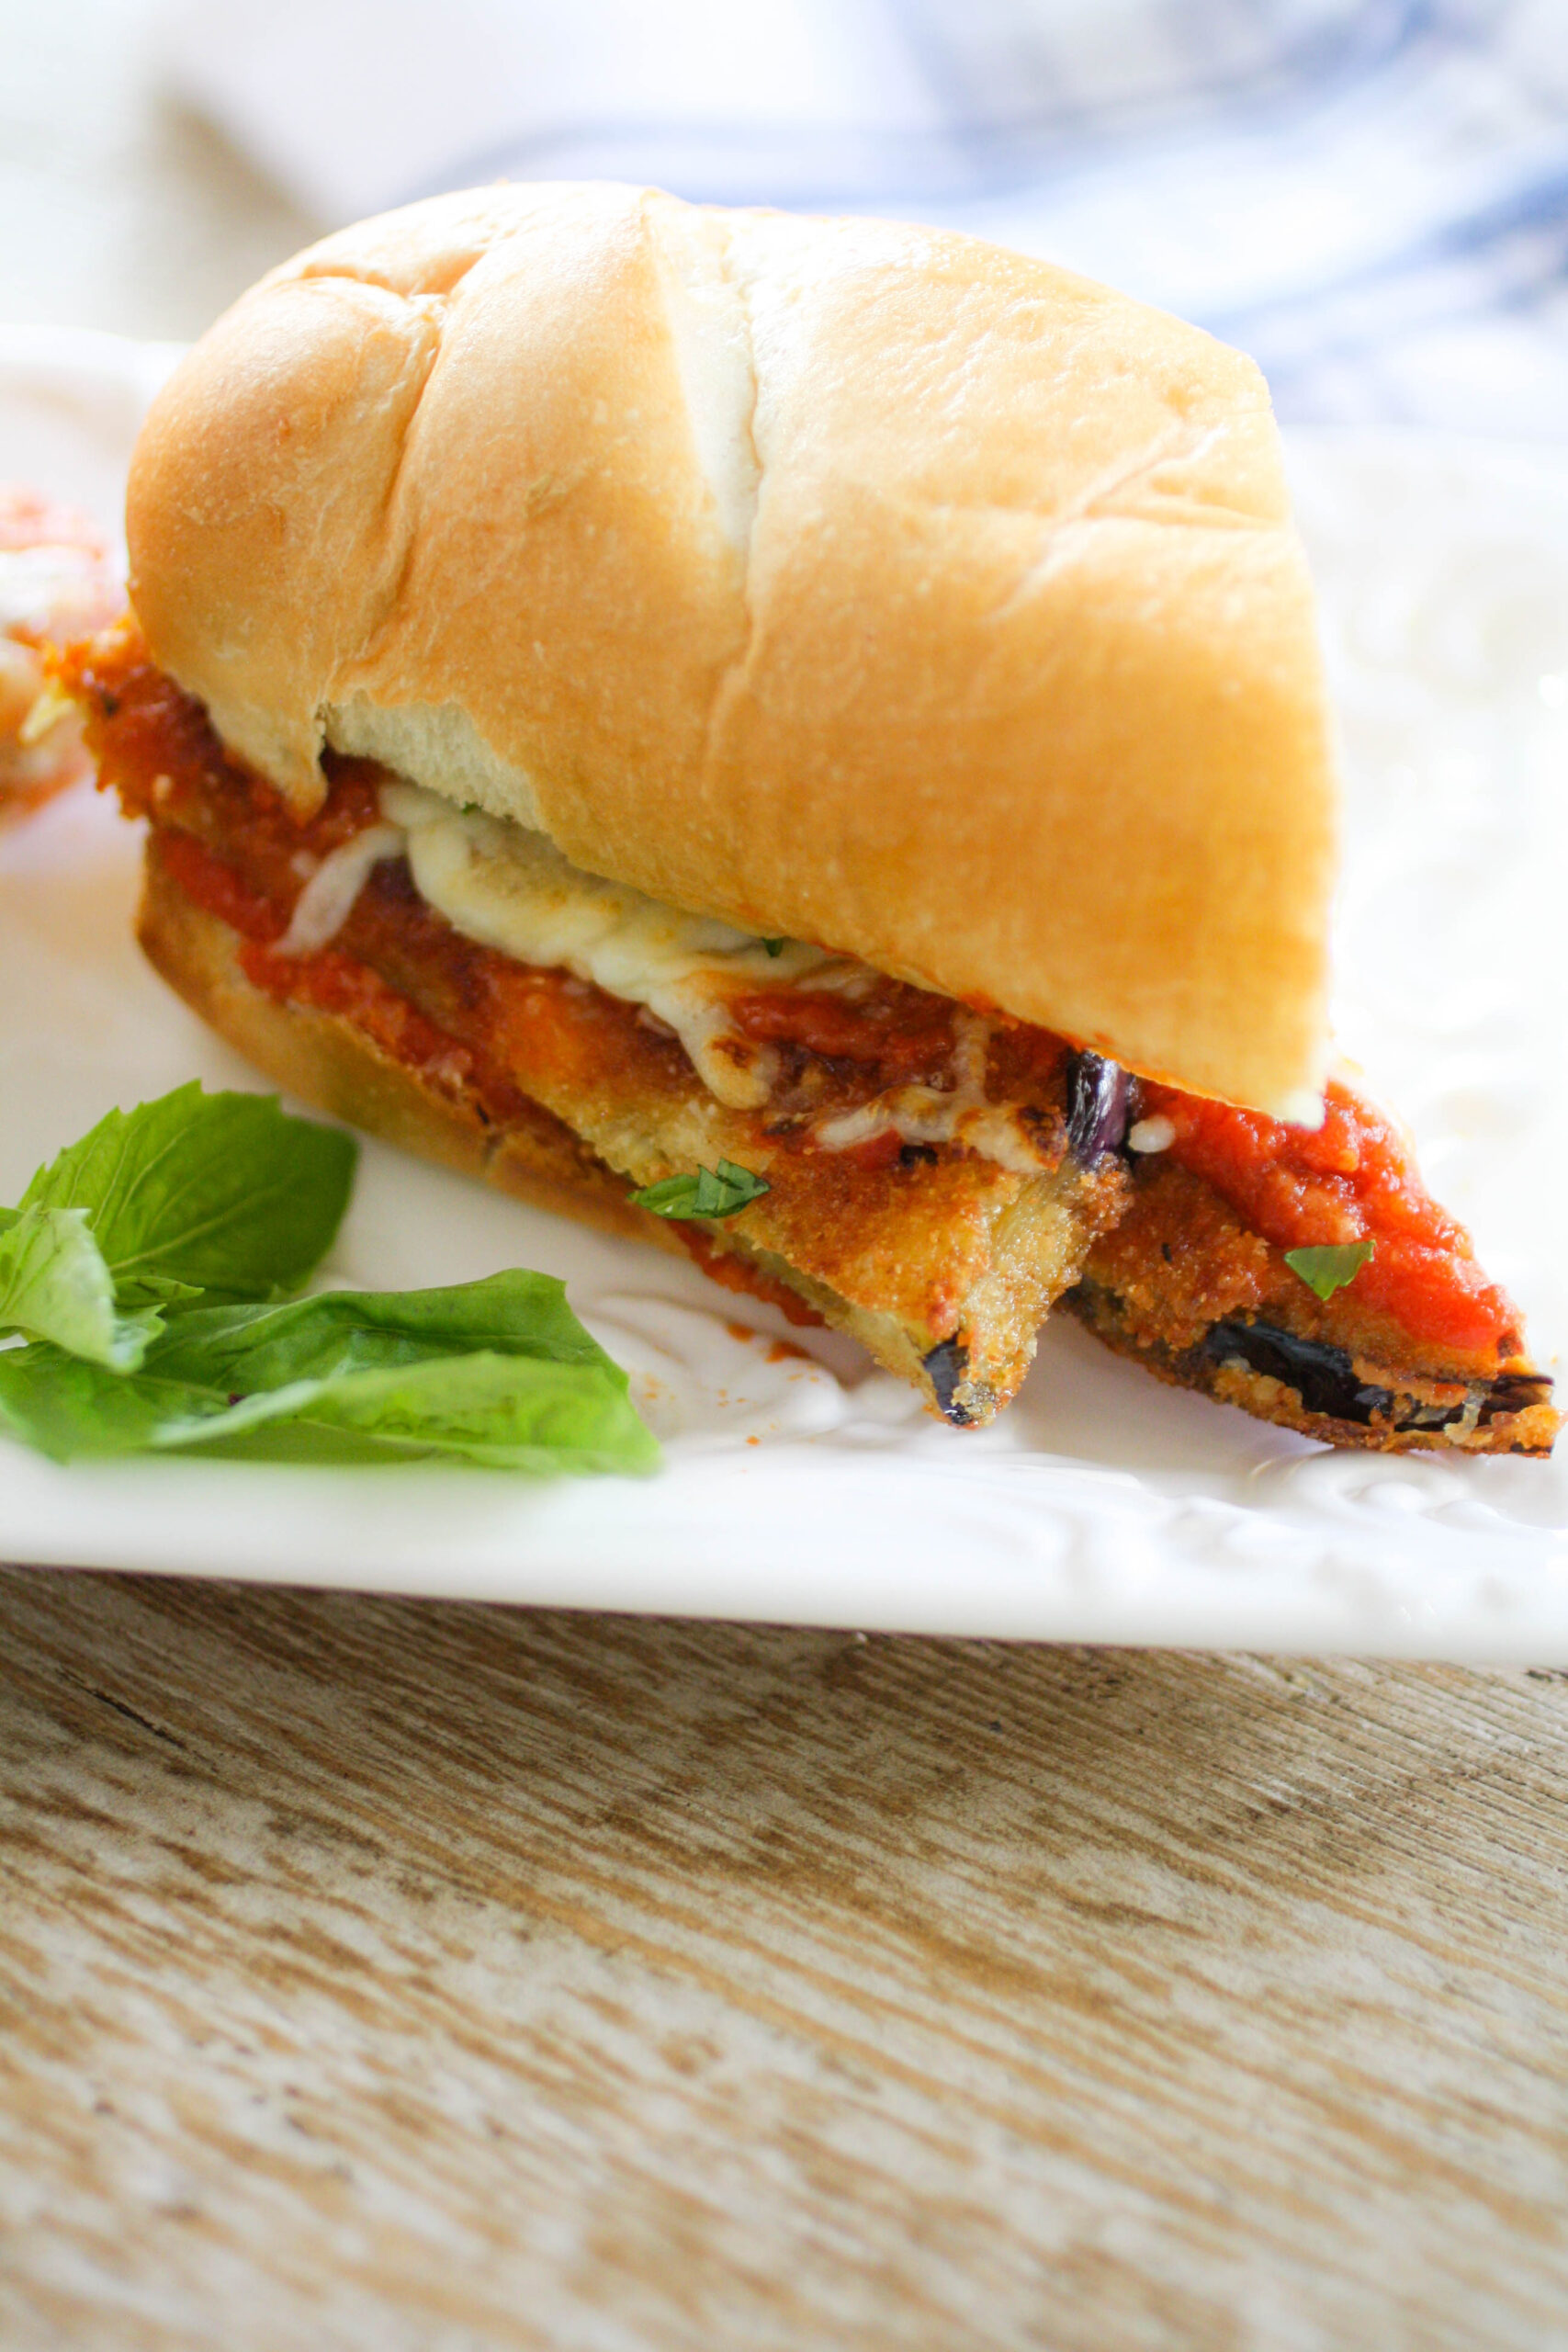 Eggplant Parmesan Sandwiches are hearty, flavorful, and such a classic sandwiche!